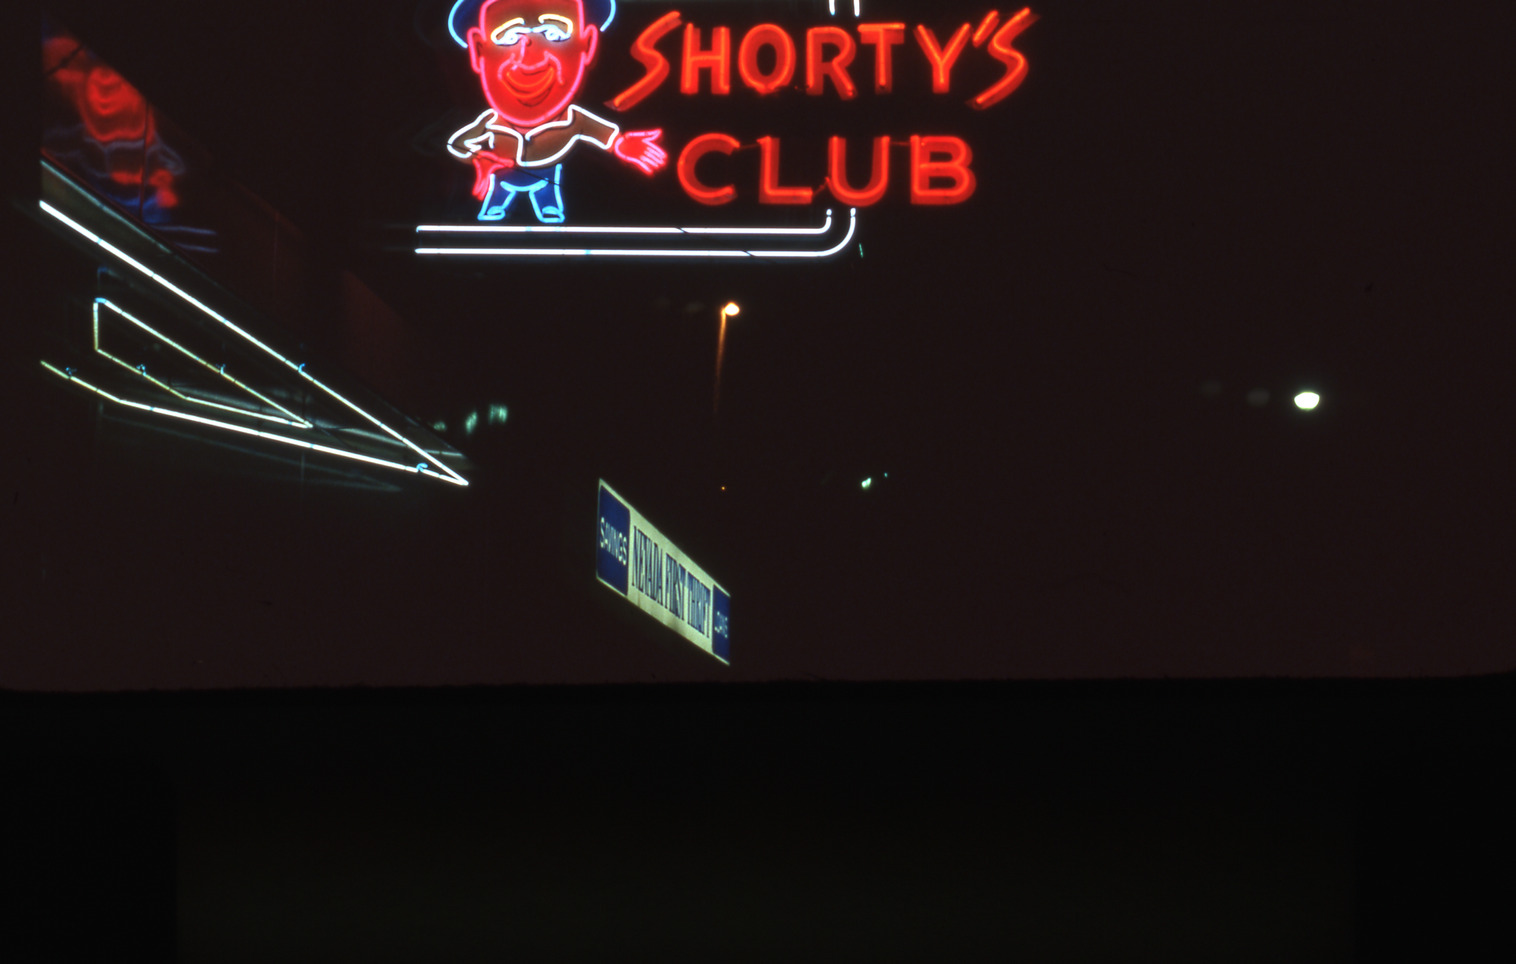 Shorty's Club flag mount wall sign, Elko, Nevada: photographic print